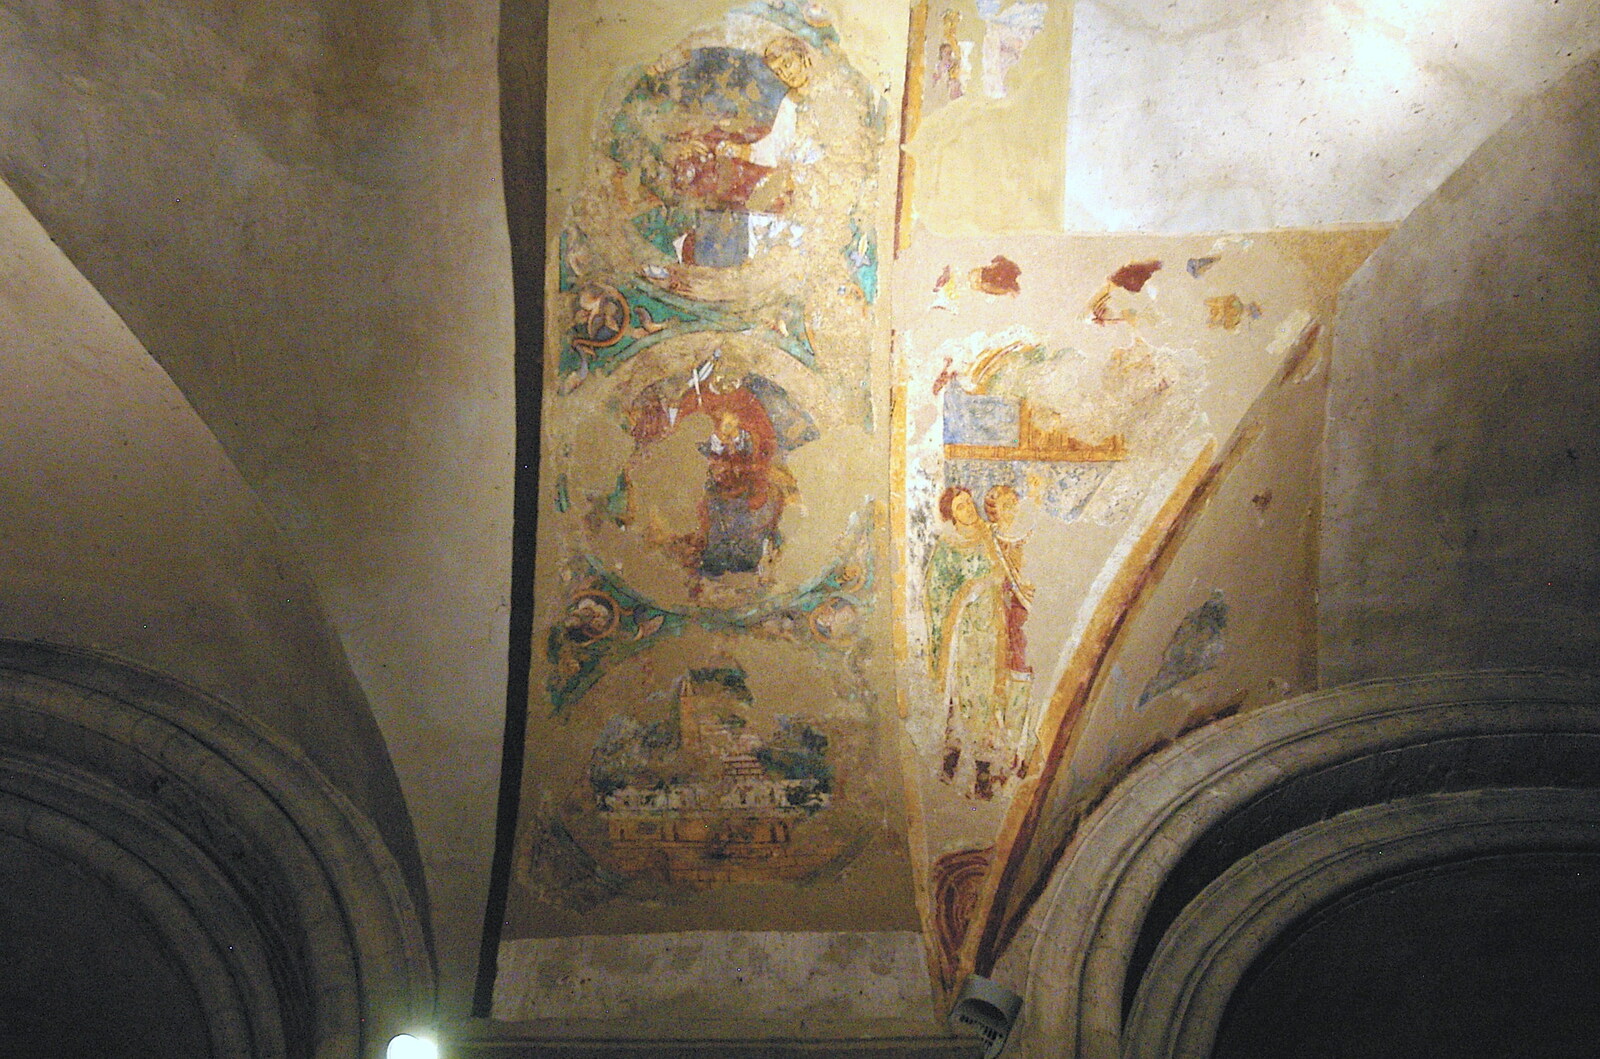 Mediaeval wall paintings from CISU Networks and Autumn Leaves at Norwich Cathedral, Eye and Norwich - 29th October 2005